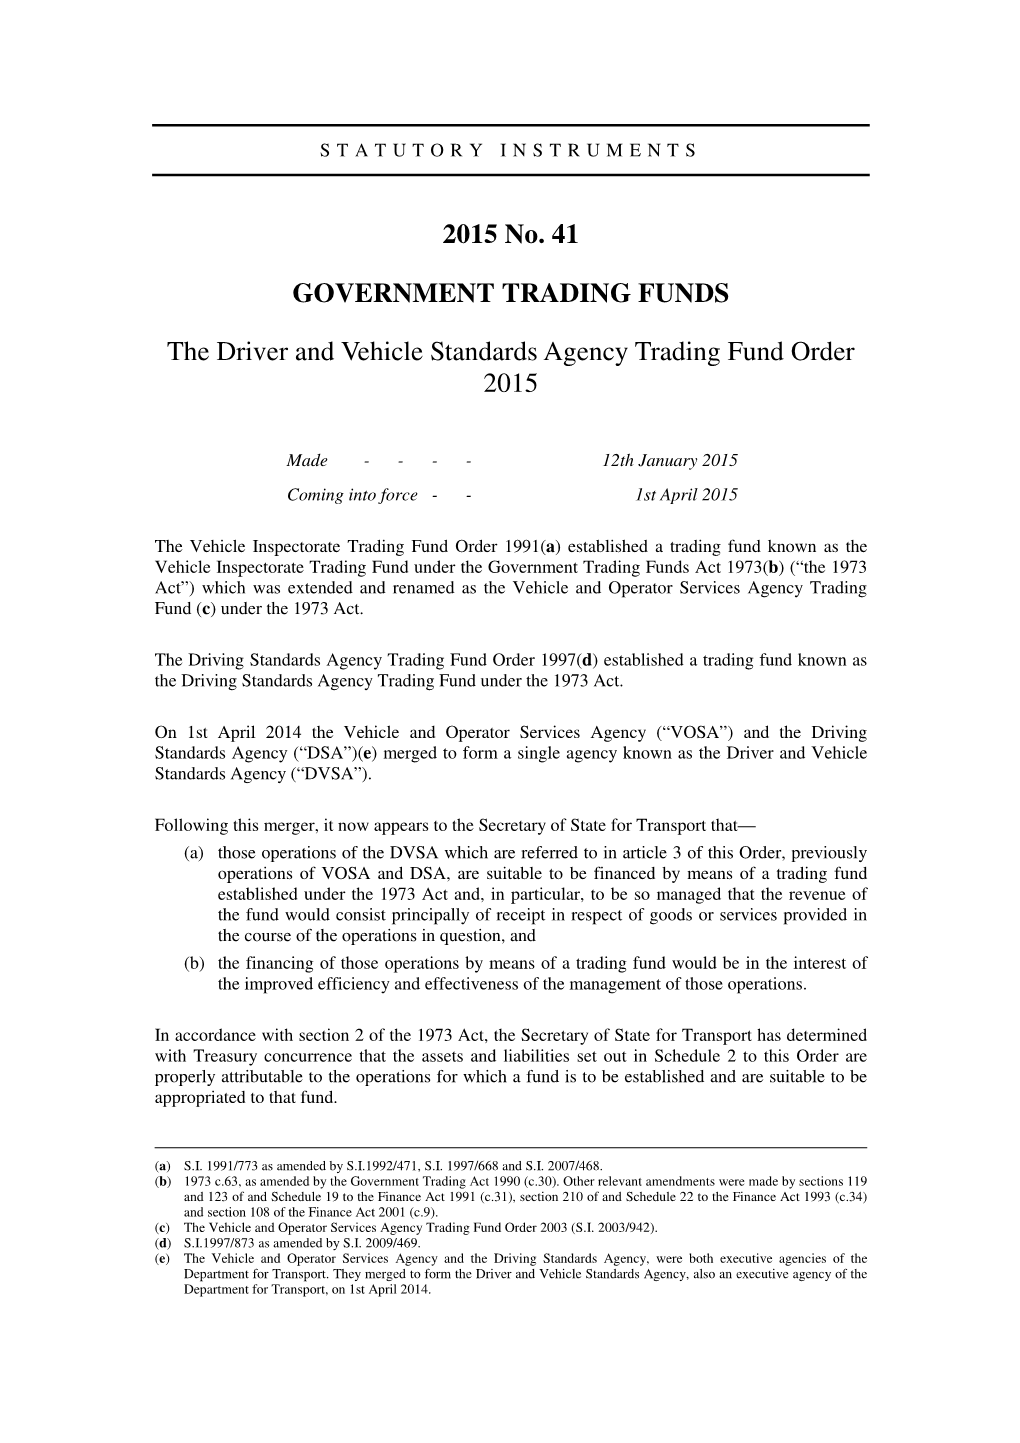 The Driver and Vehicle Standards Agency Trading Fund Order 2015